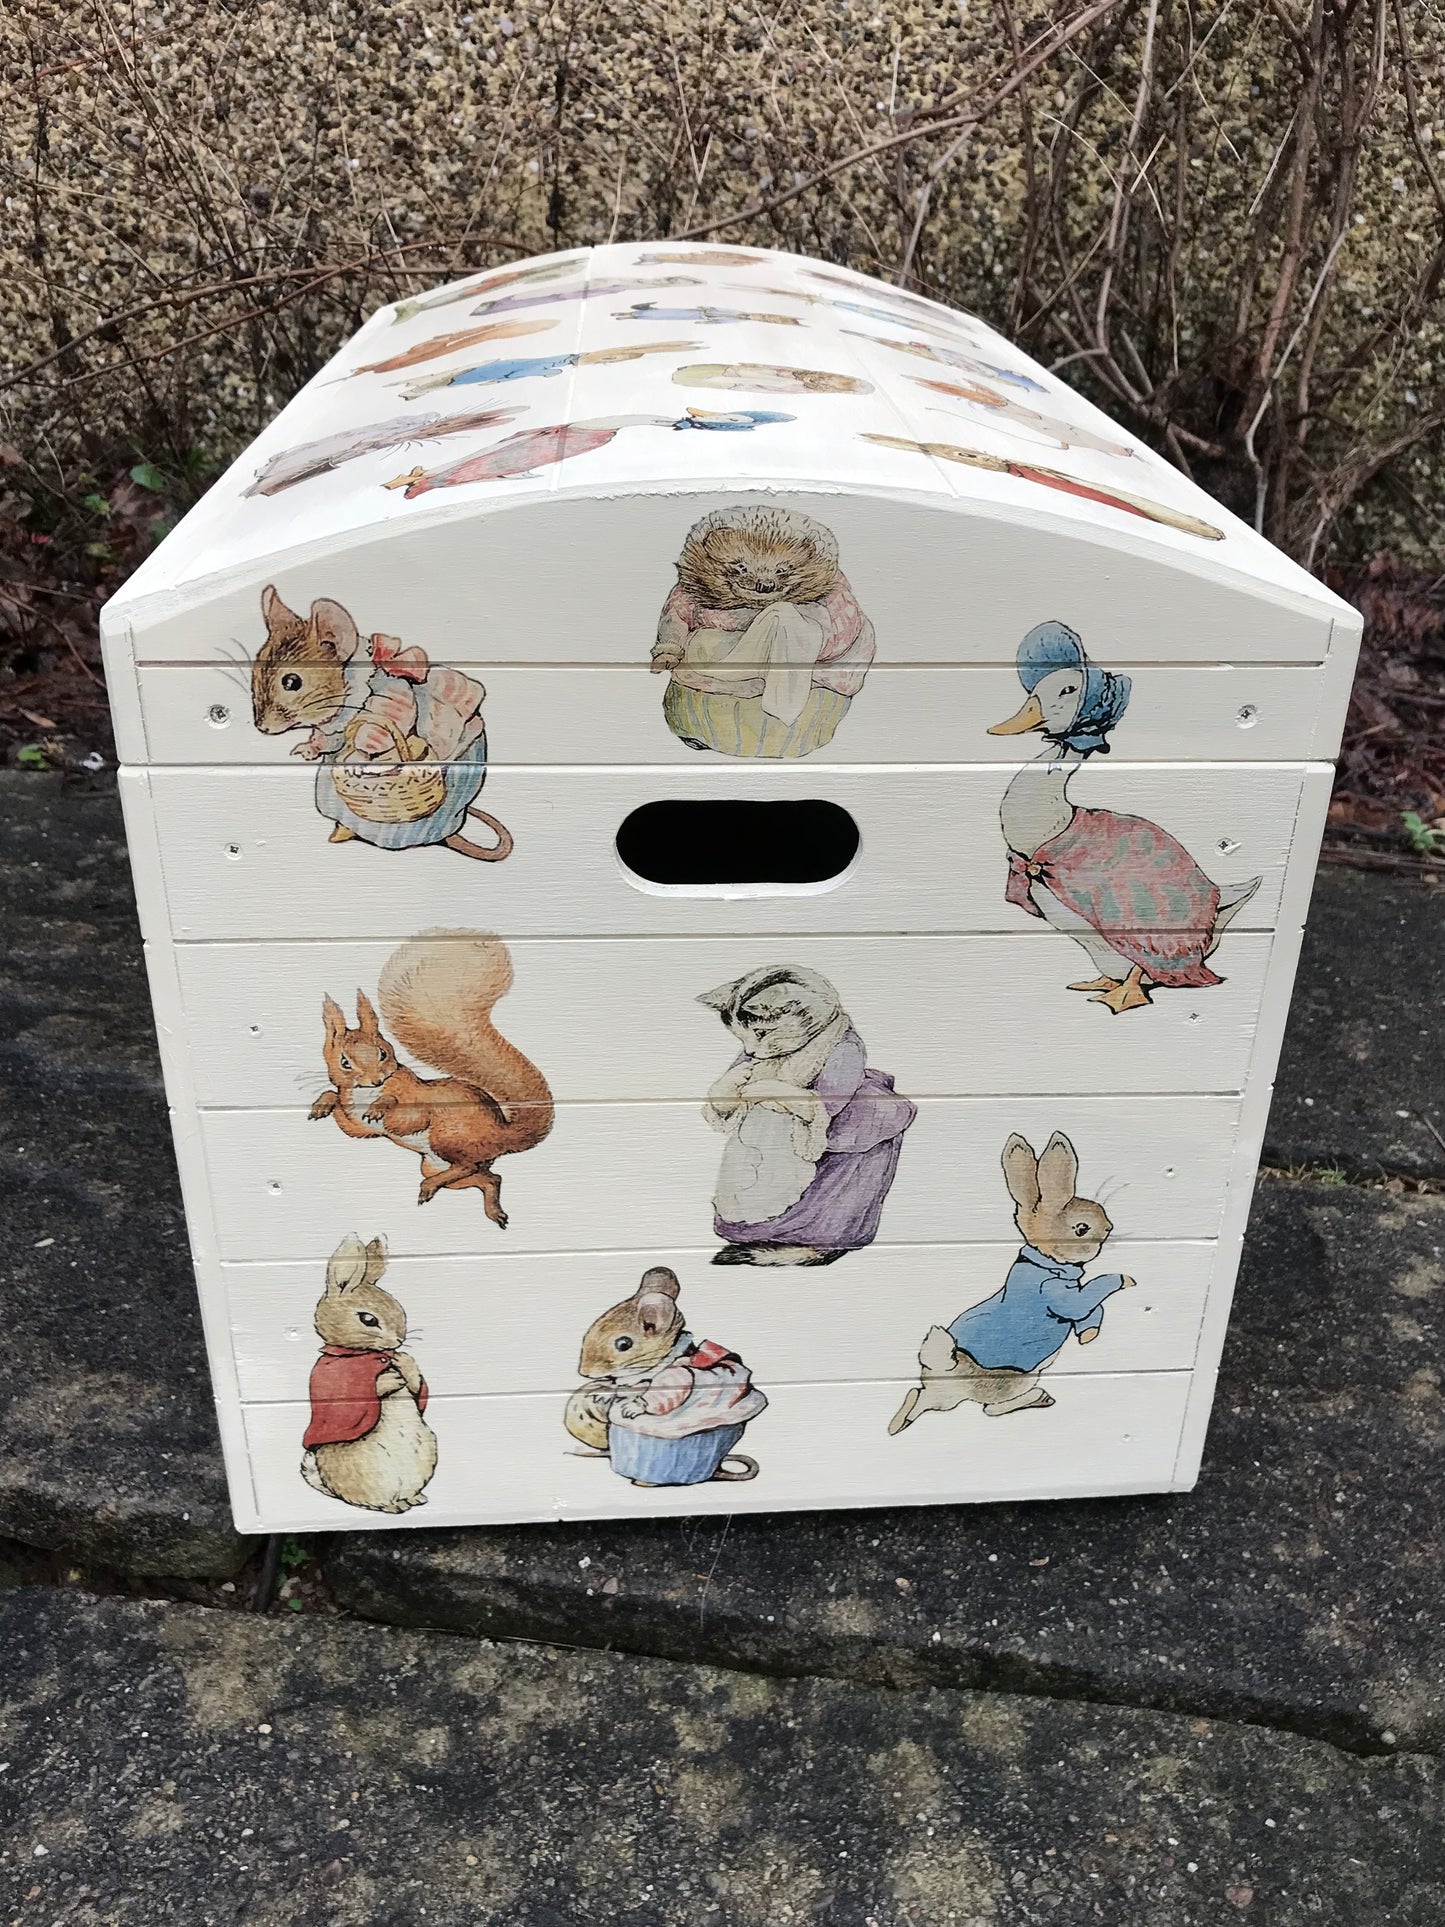 Children's personalised wooden storage chest / trunk with Beatrix Potter theme